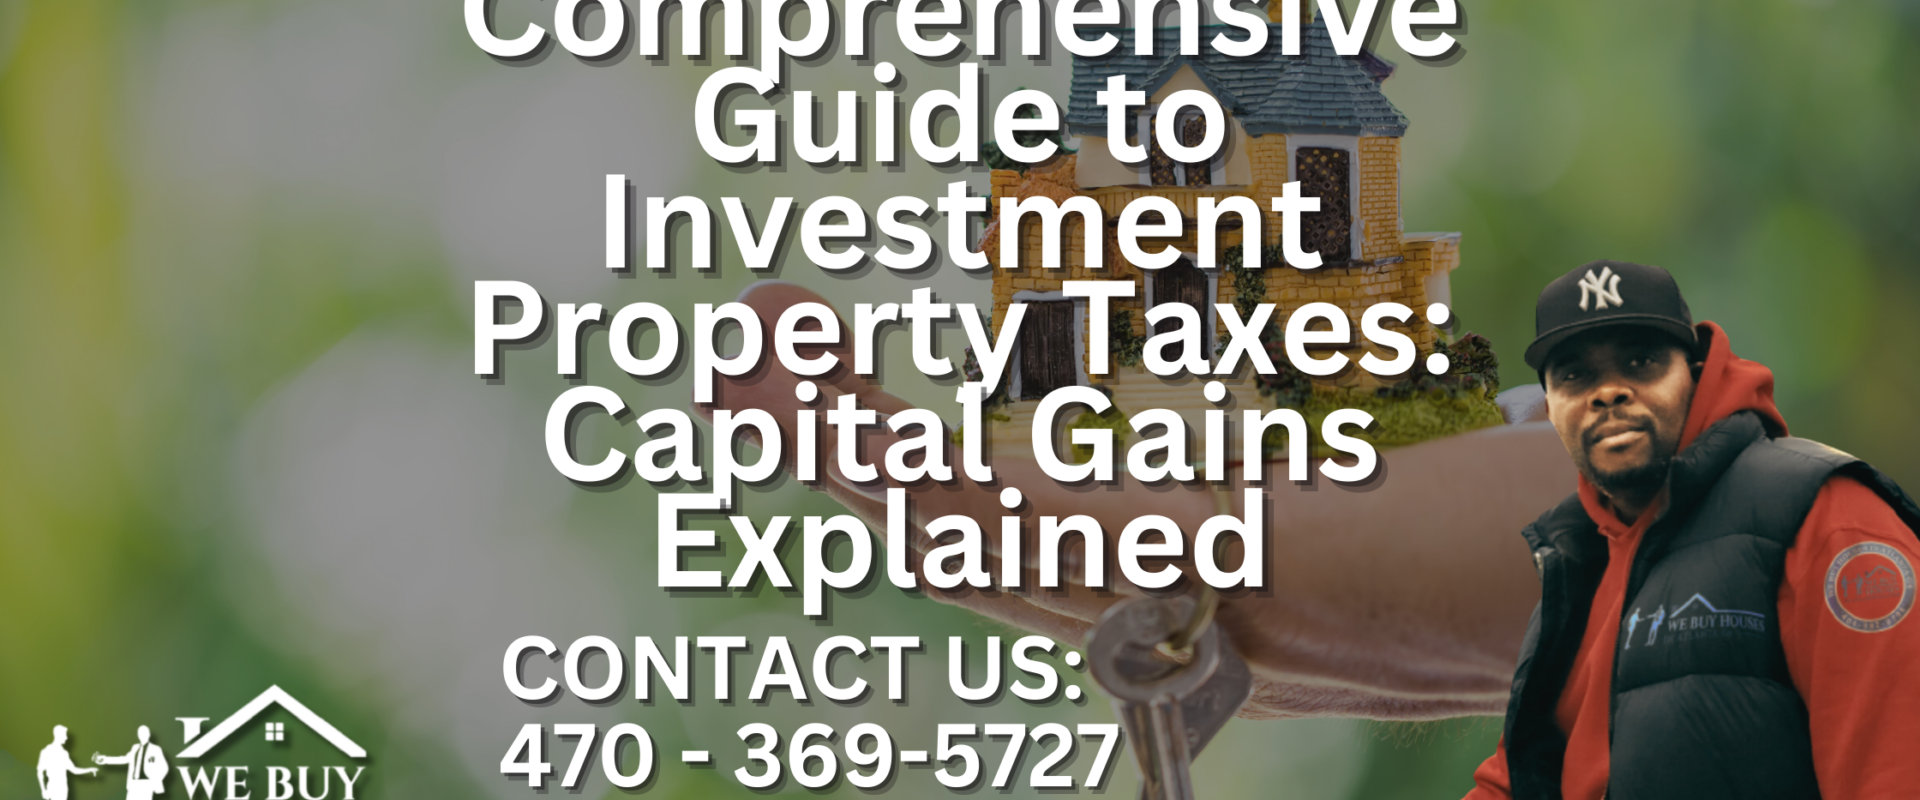 Comprehensive Guide to Investment Property Taxes: Capital Gains Explained